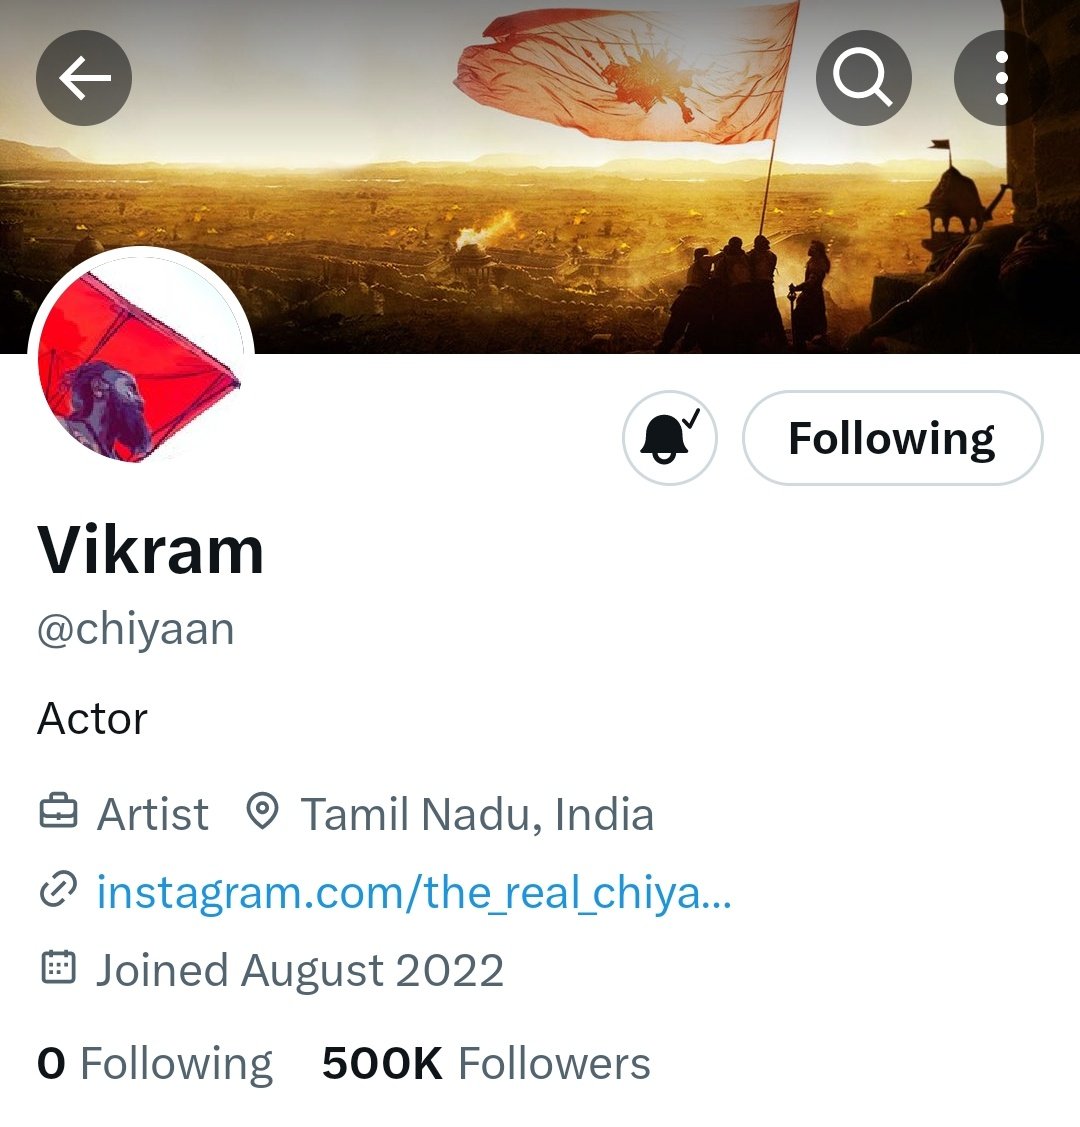 '500K CHIYAANIANS' ❤️ Our @Chiyaan's Official @X Handle Is Now Reached 500K Followers! #500KHeartsForCHIYAAN